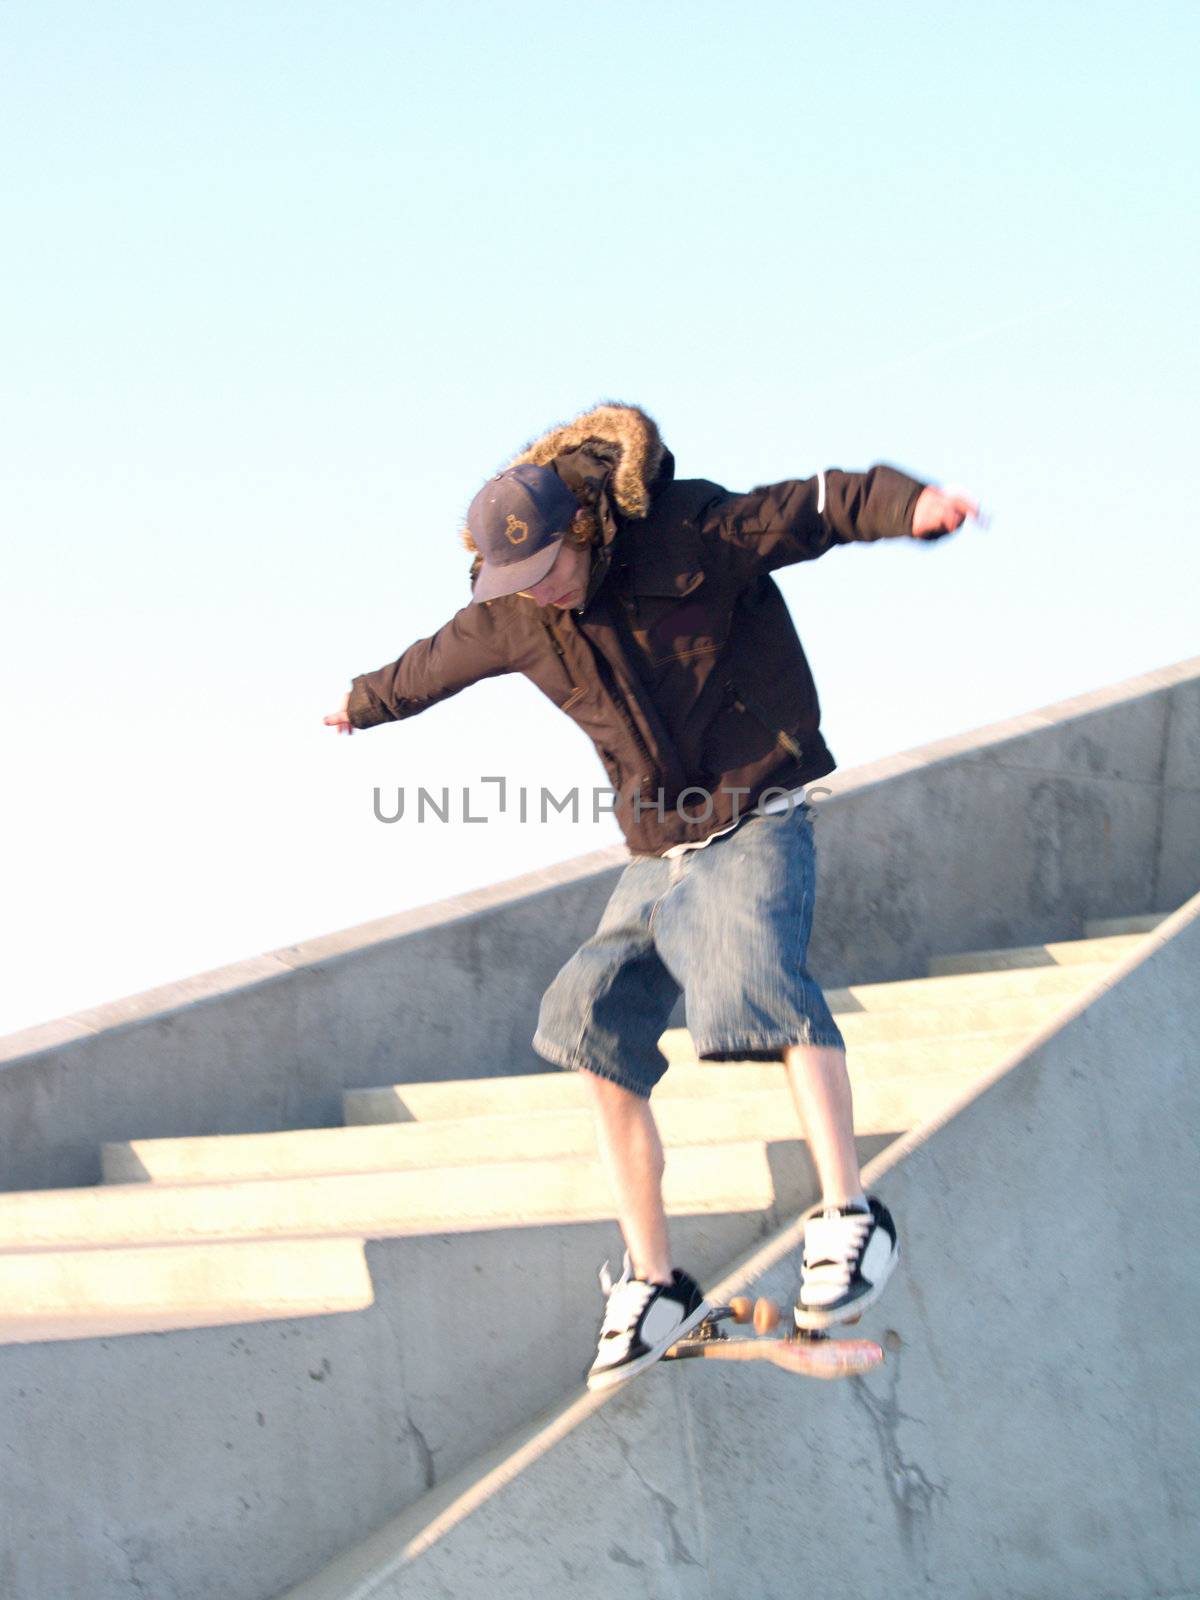 Urban lifestyle - Young teenager skate boarding